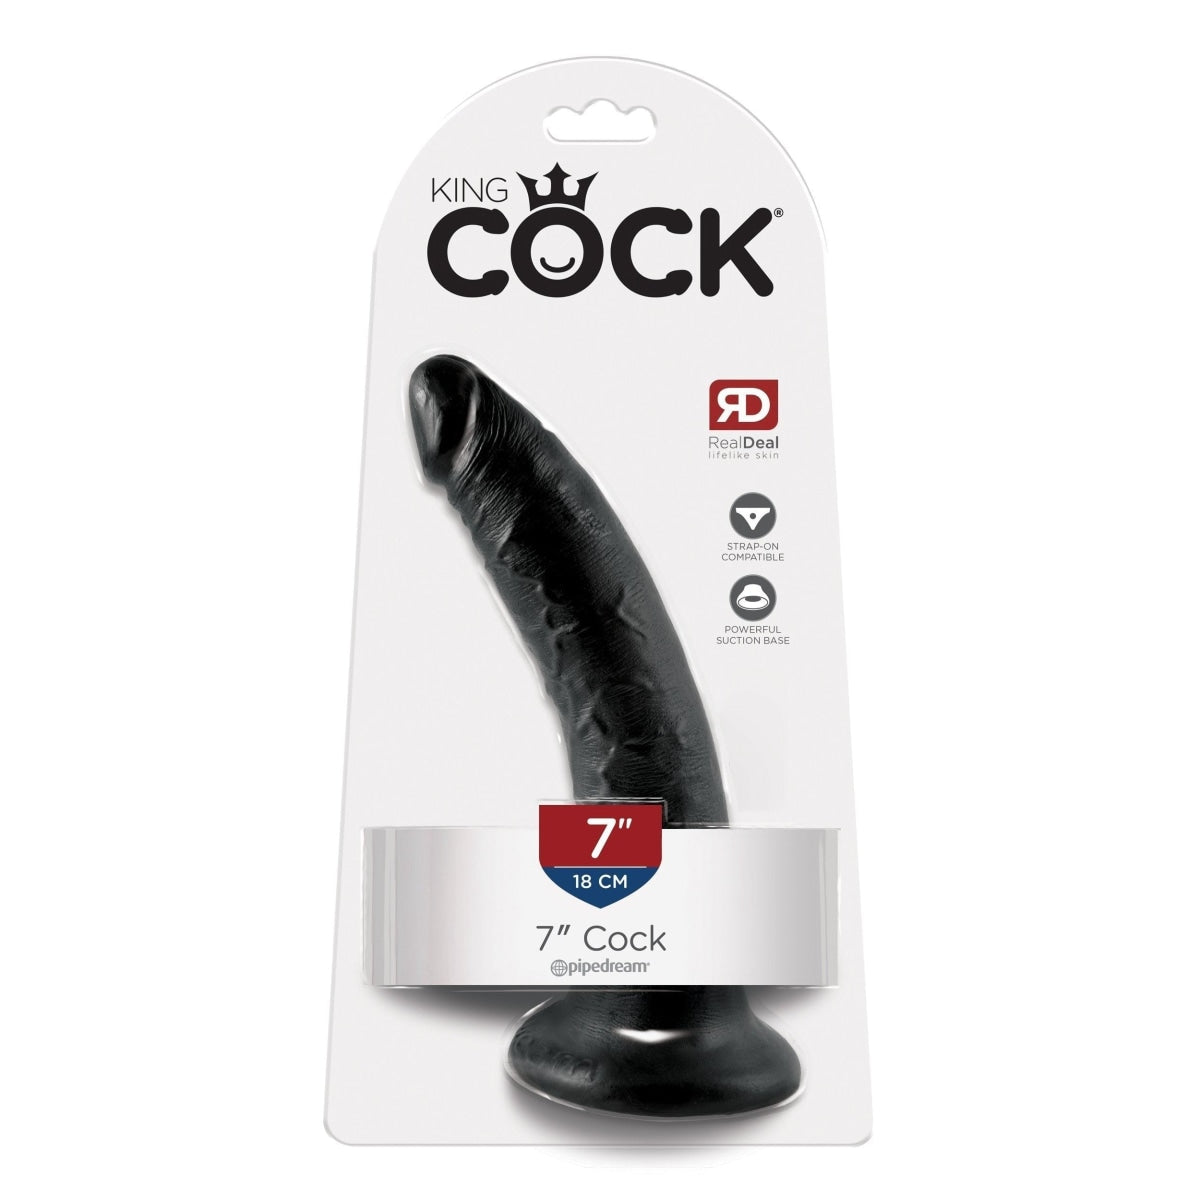 King Cock 7 In Cock Black Intimates Adult Boutique